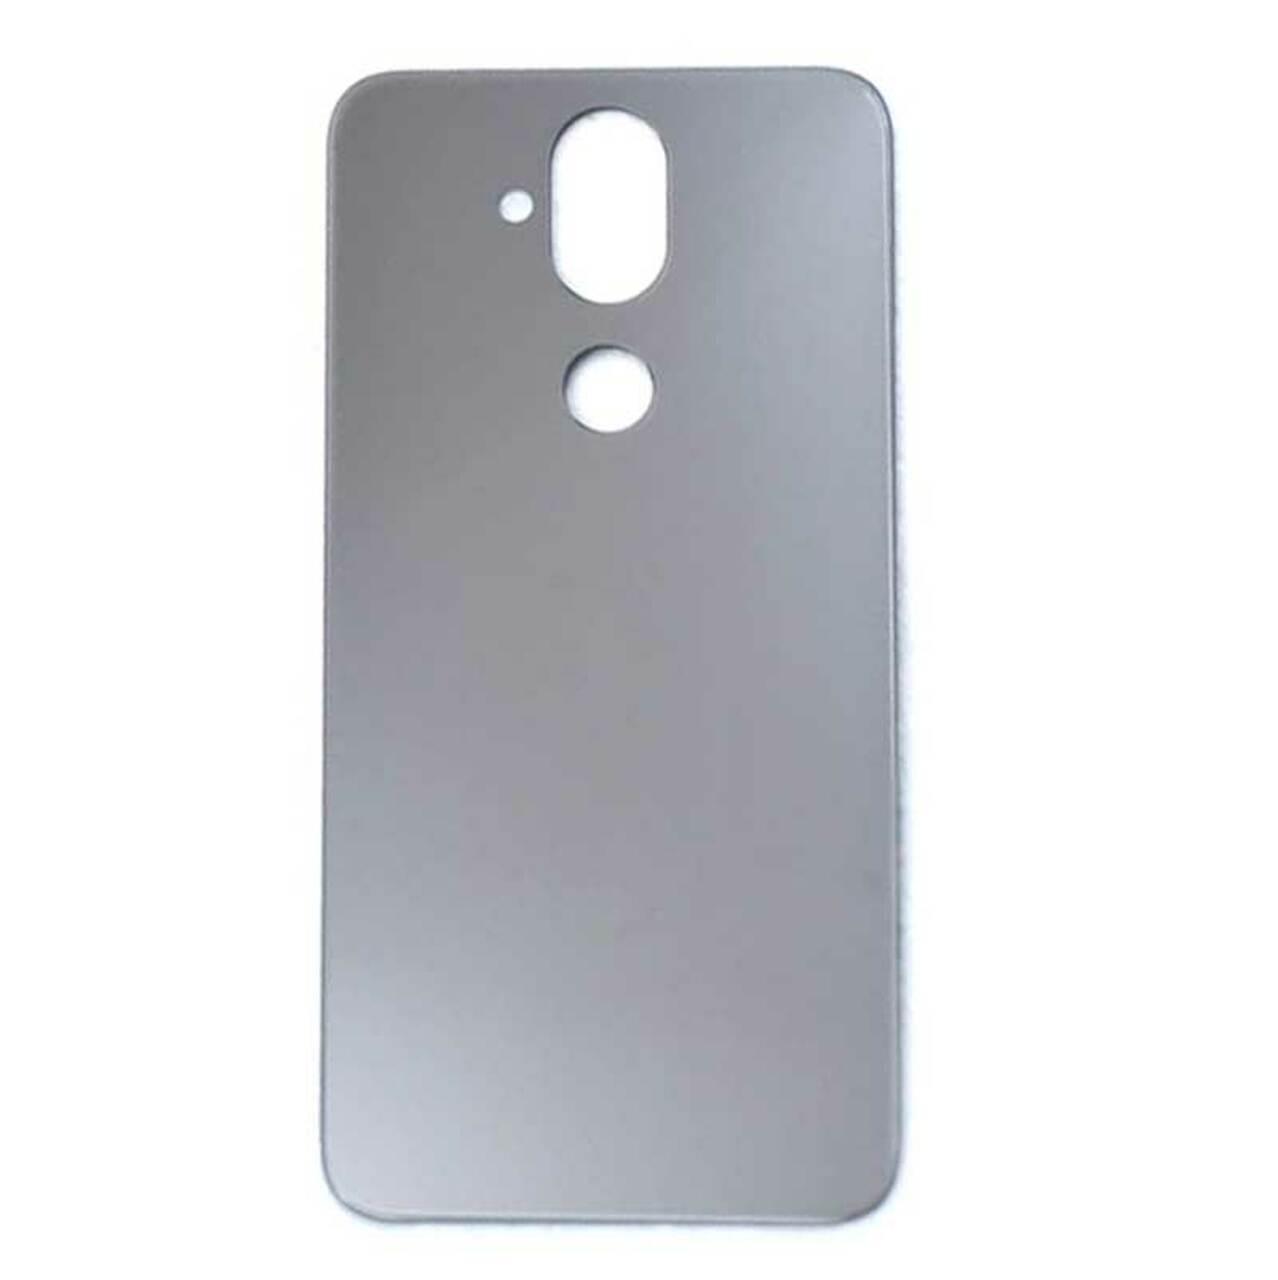 Back Glass Panel Housing Body for Nokia 8.1 White or Silver